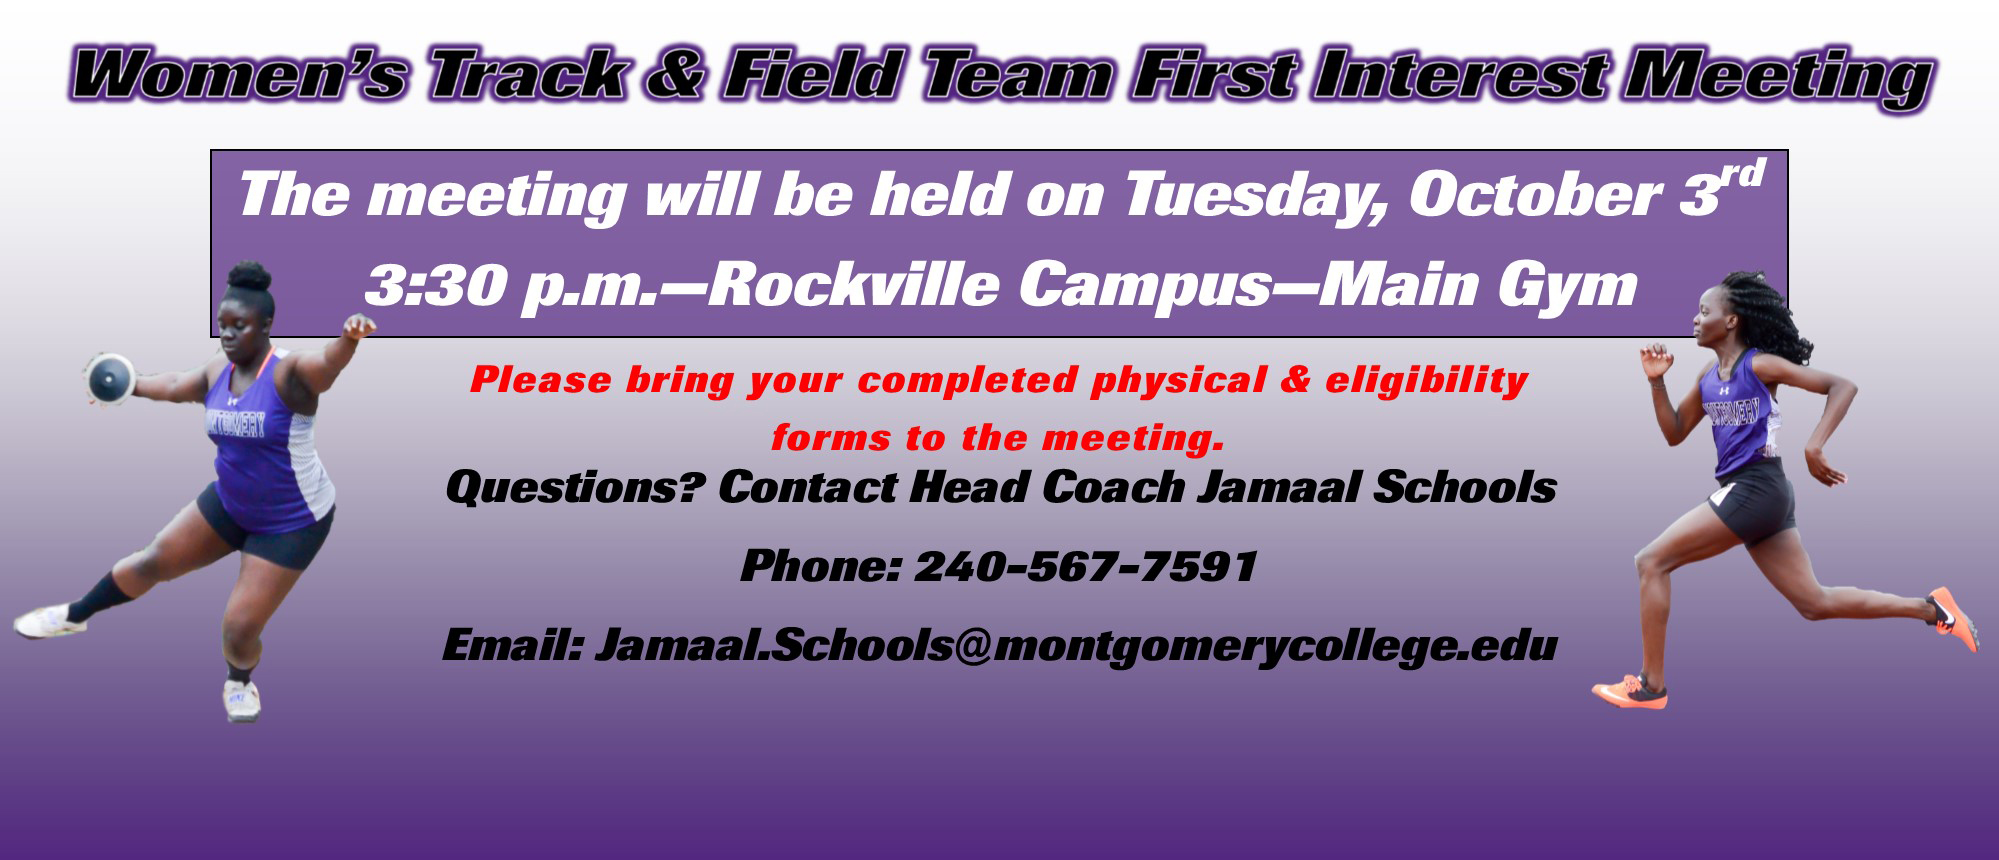 Women's Track and Field Team Hosts Interest Meeting on Tuesday, October 3rd